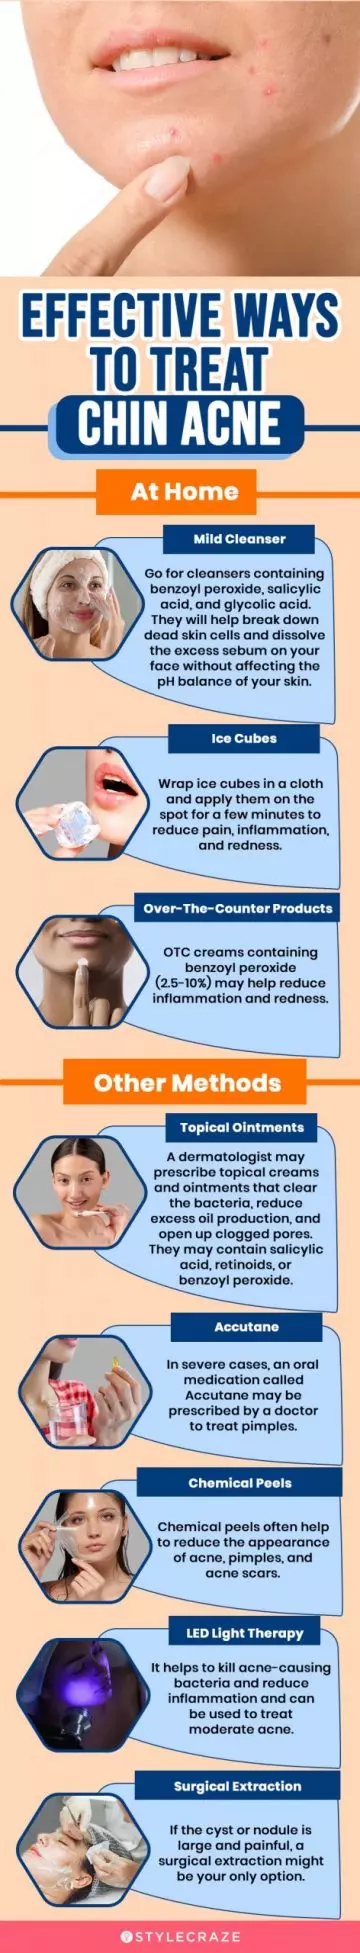 effective ways to treat chin acne (infographic)